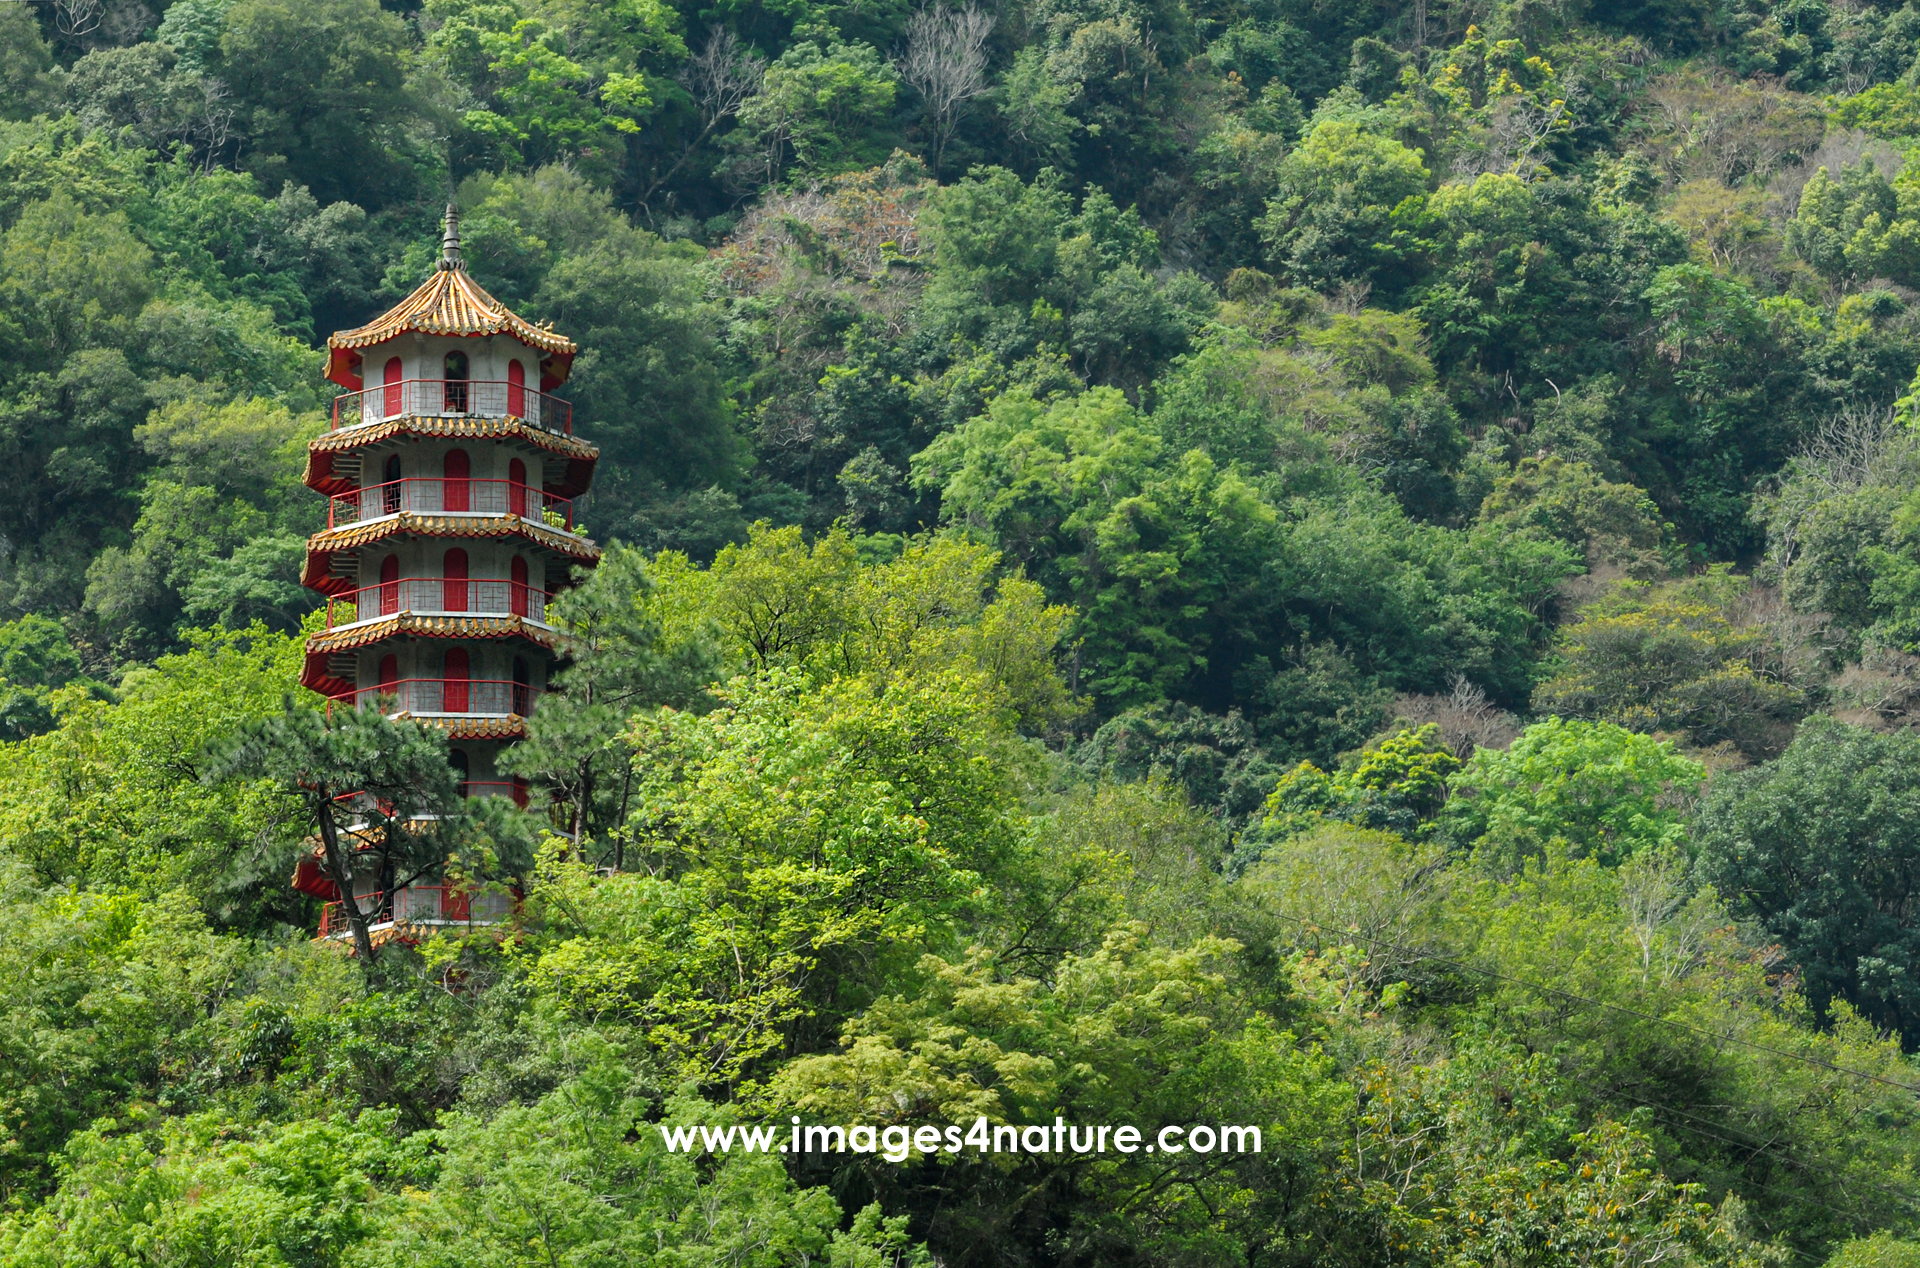 White-red Tianfeng Pagoda in dense green mountain forest